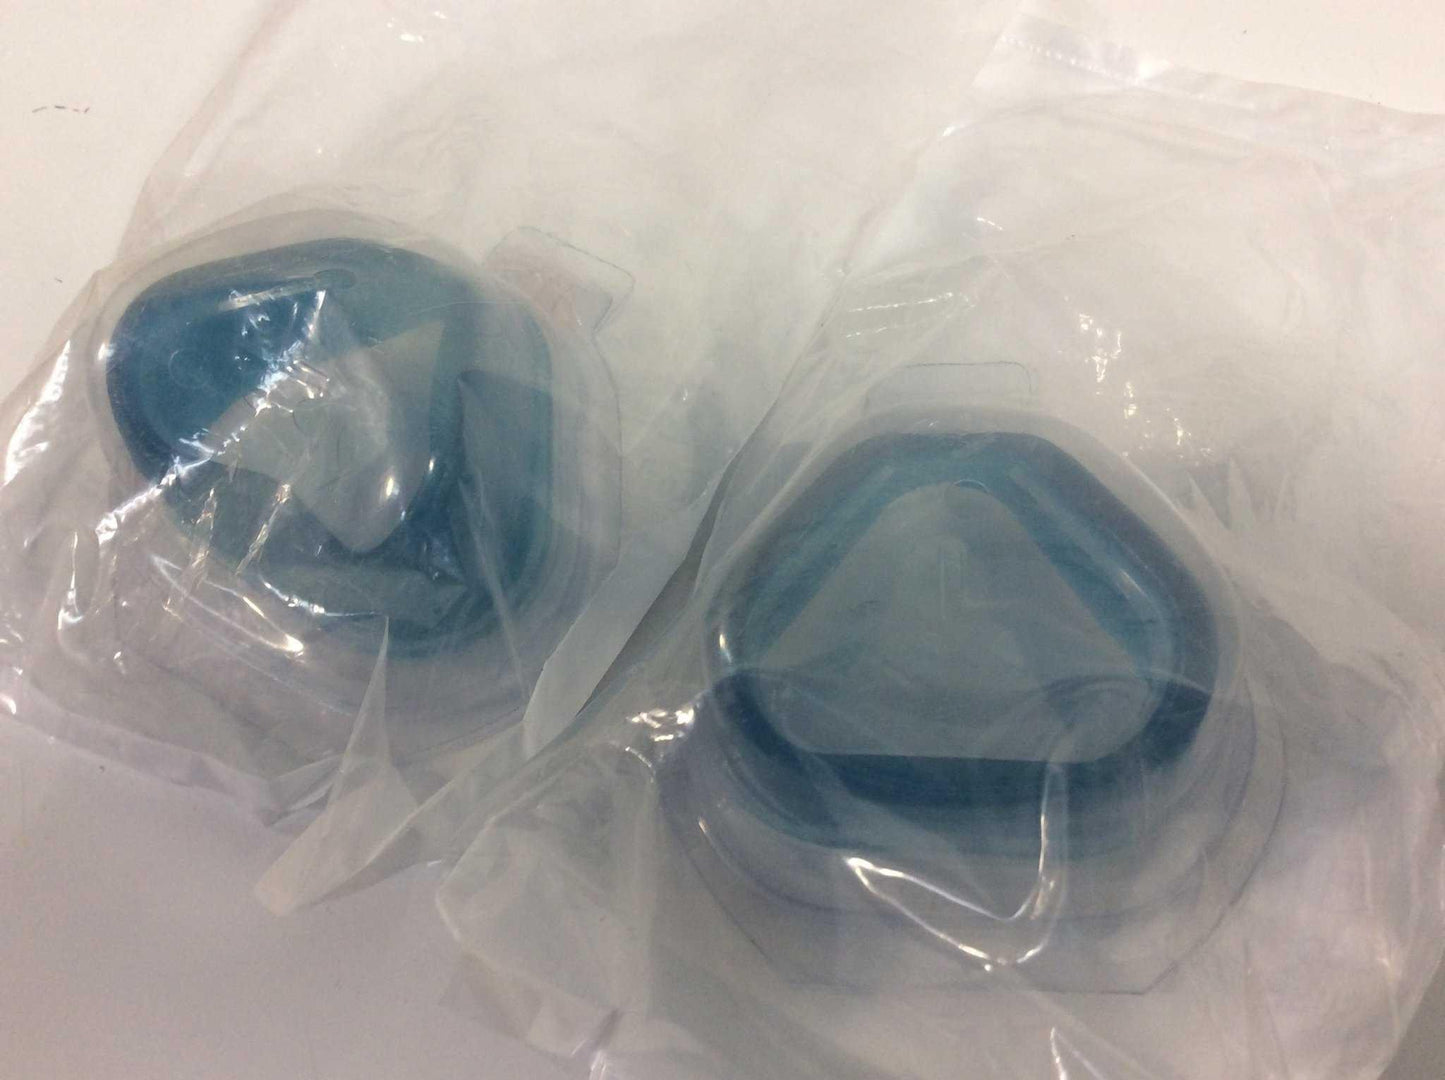 Lot of 2 NEW Philips Respironics Large ComfortGel Nasal Cushion 1009051 FREE Shipping - MBR Medicals